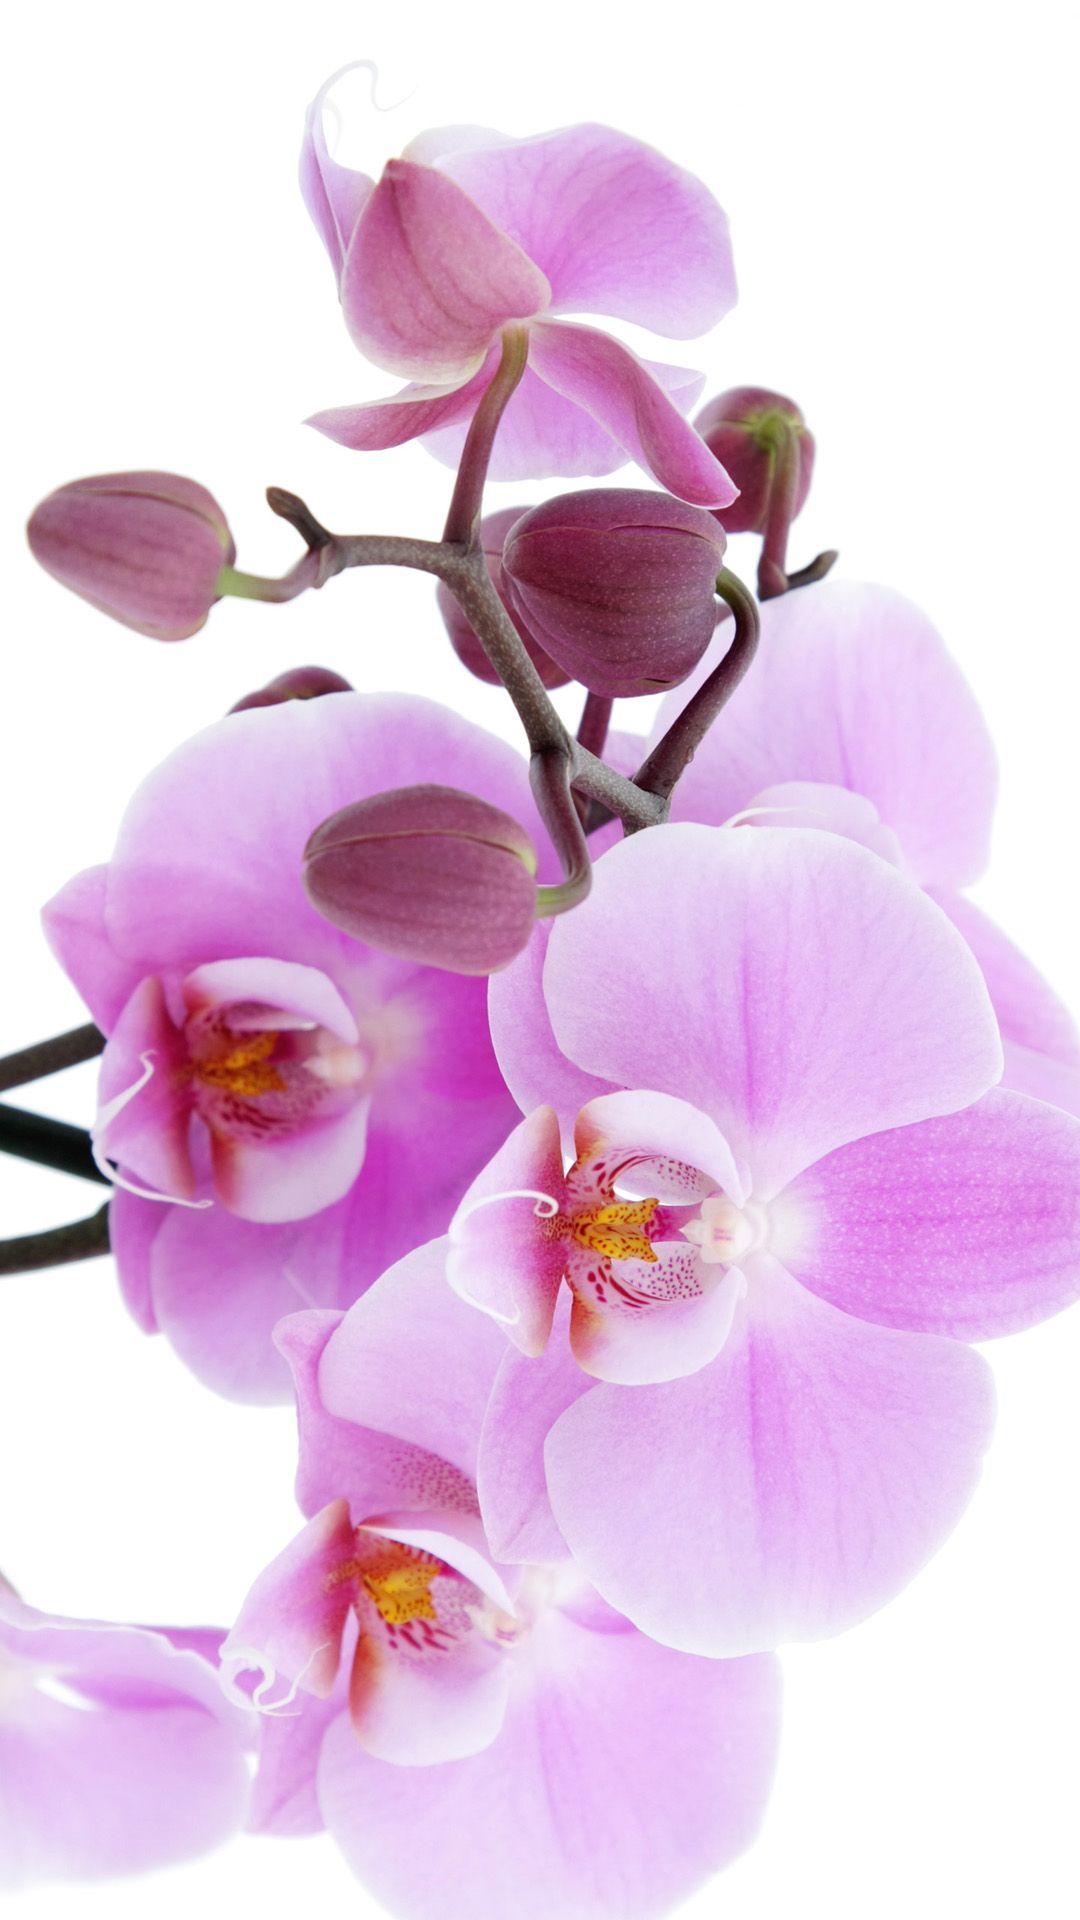 Pure Pink Orchid iPhone 6 wallpaper. Flower, Wallpaper!